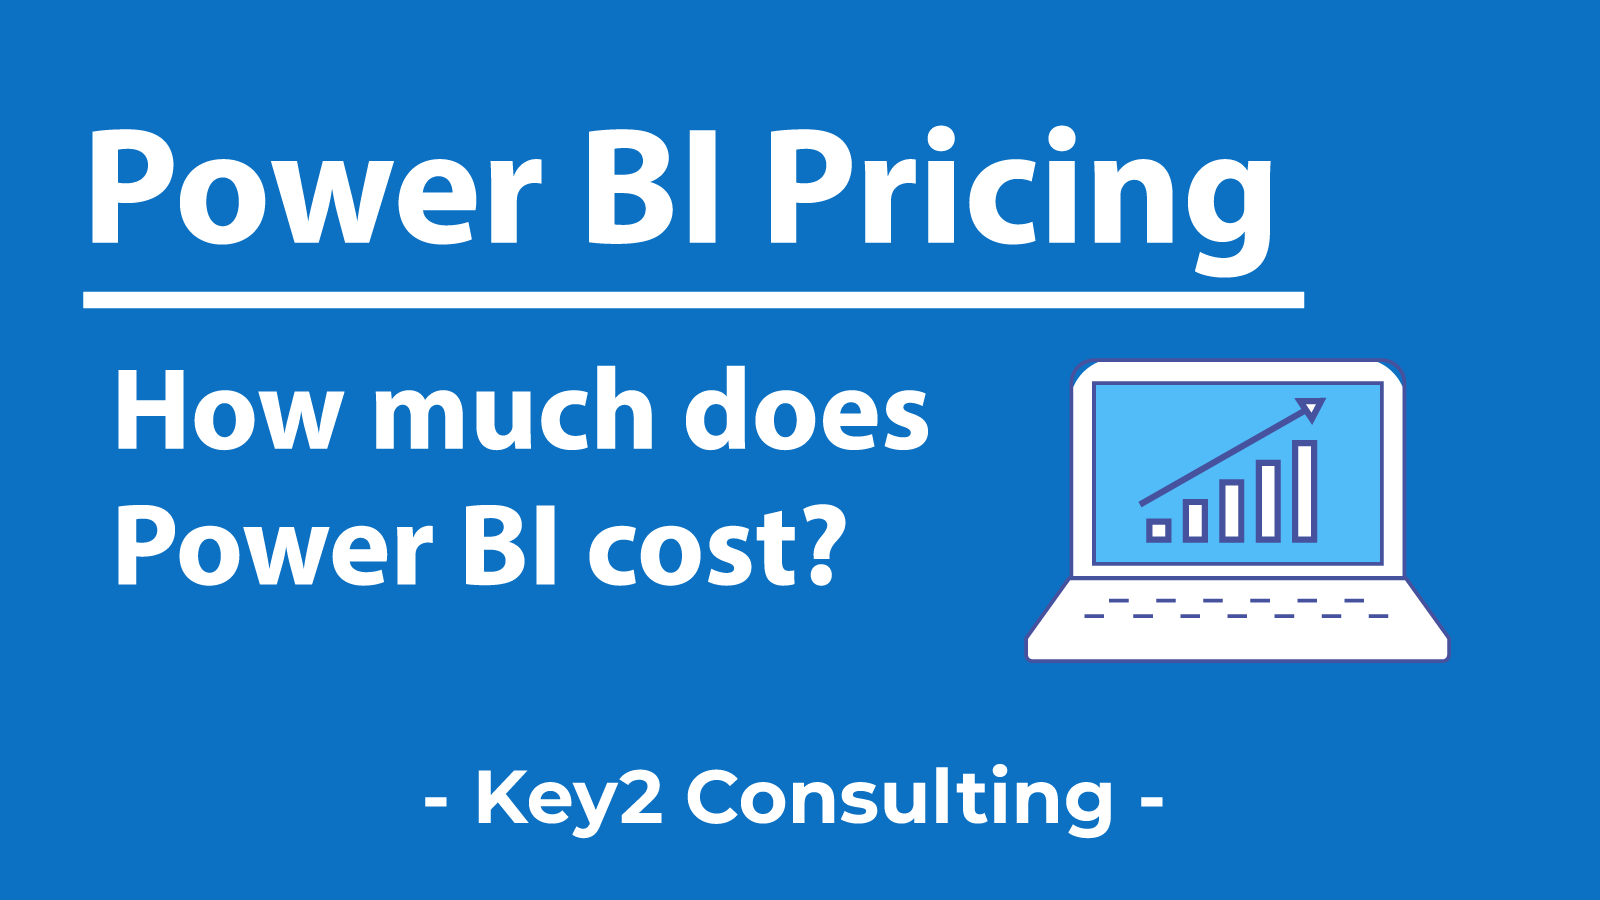 Power BI Pricing How Much Does Power BI Cost?